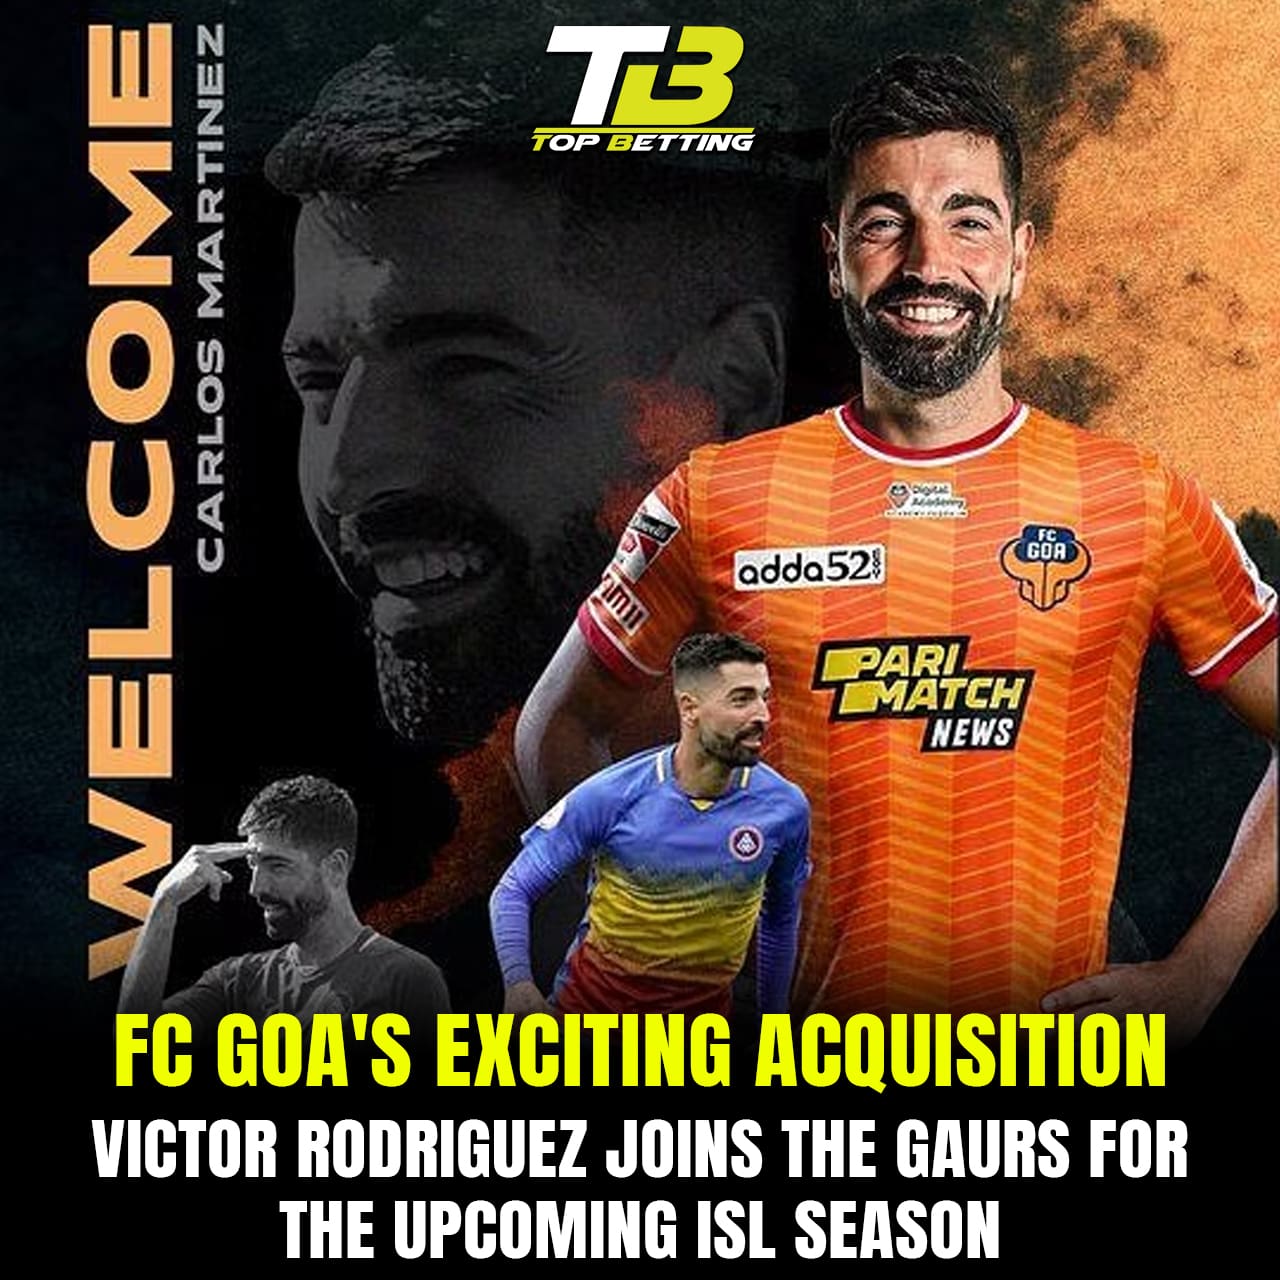 FC Goa’s Exciting Acquisition: Victor Rodriguez Joins the Gaurs for the Upcoming ISL Season